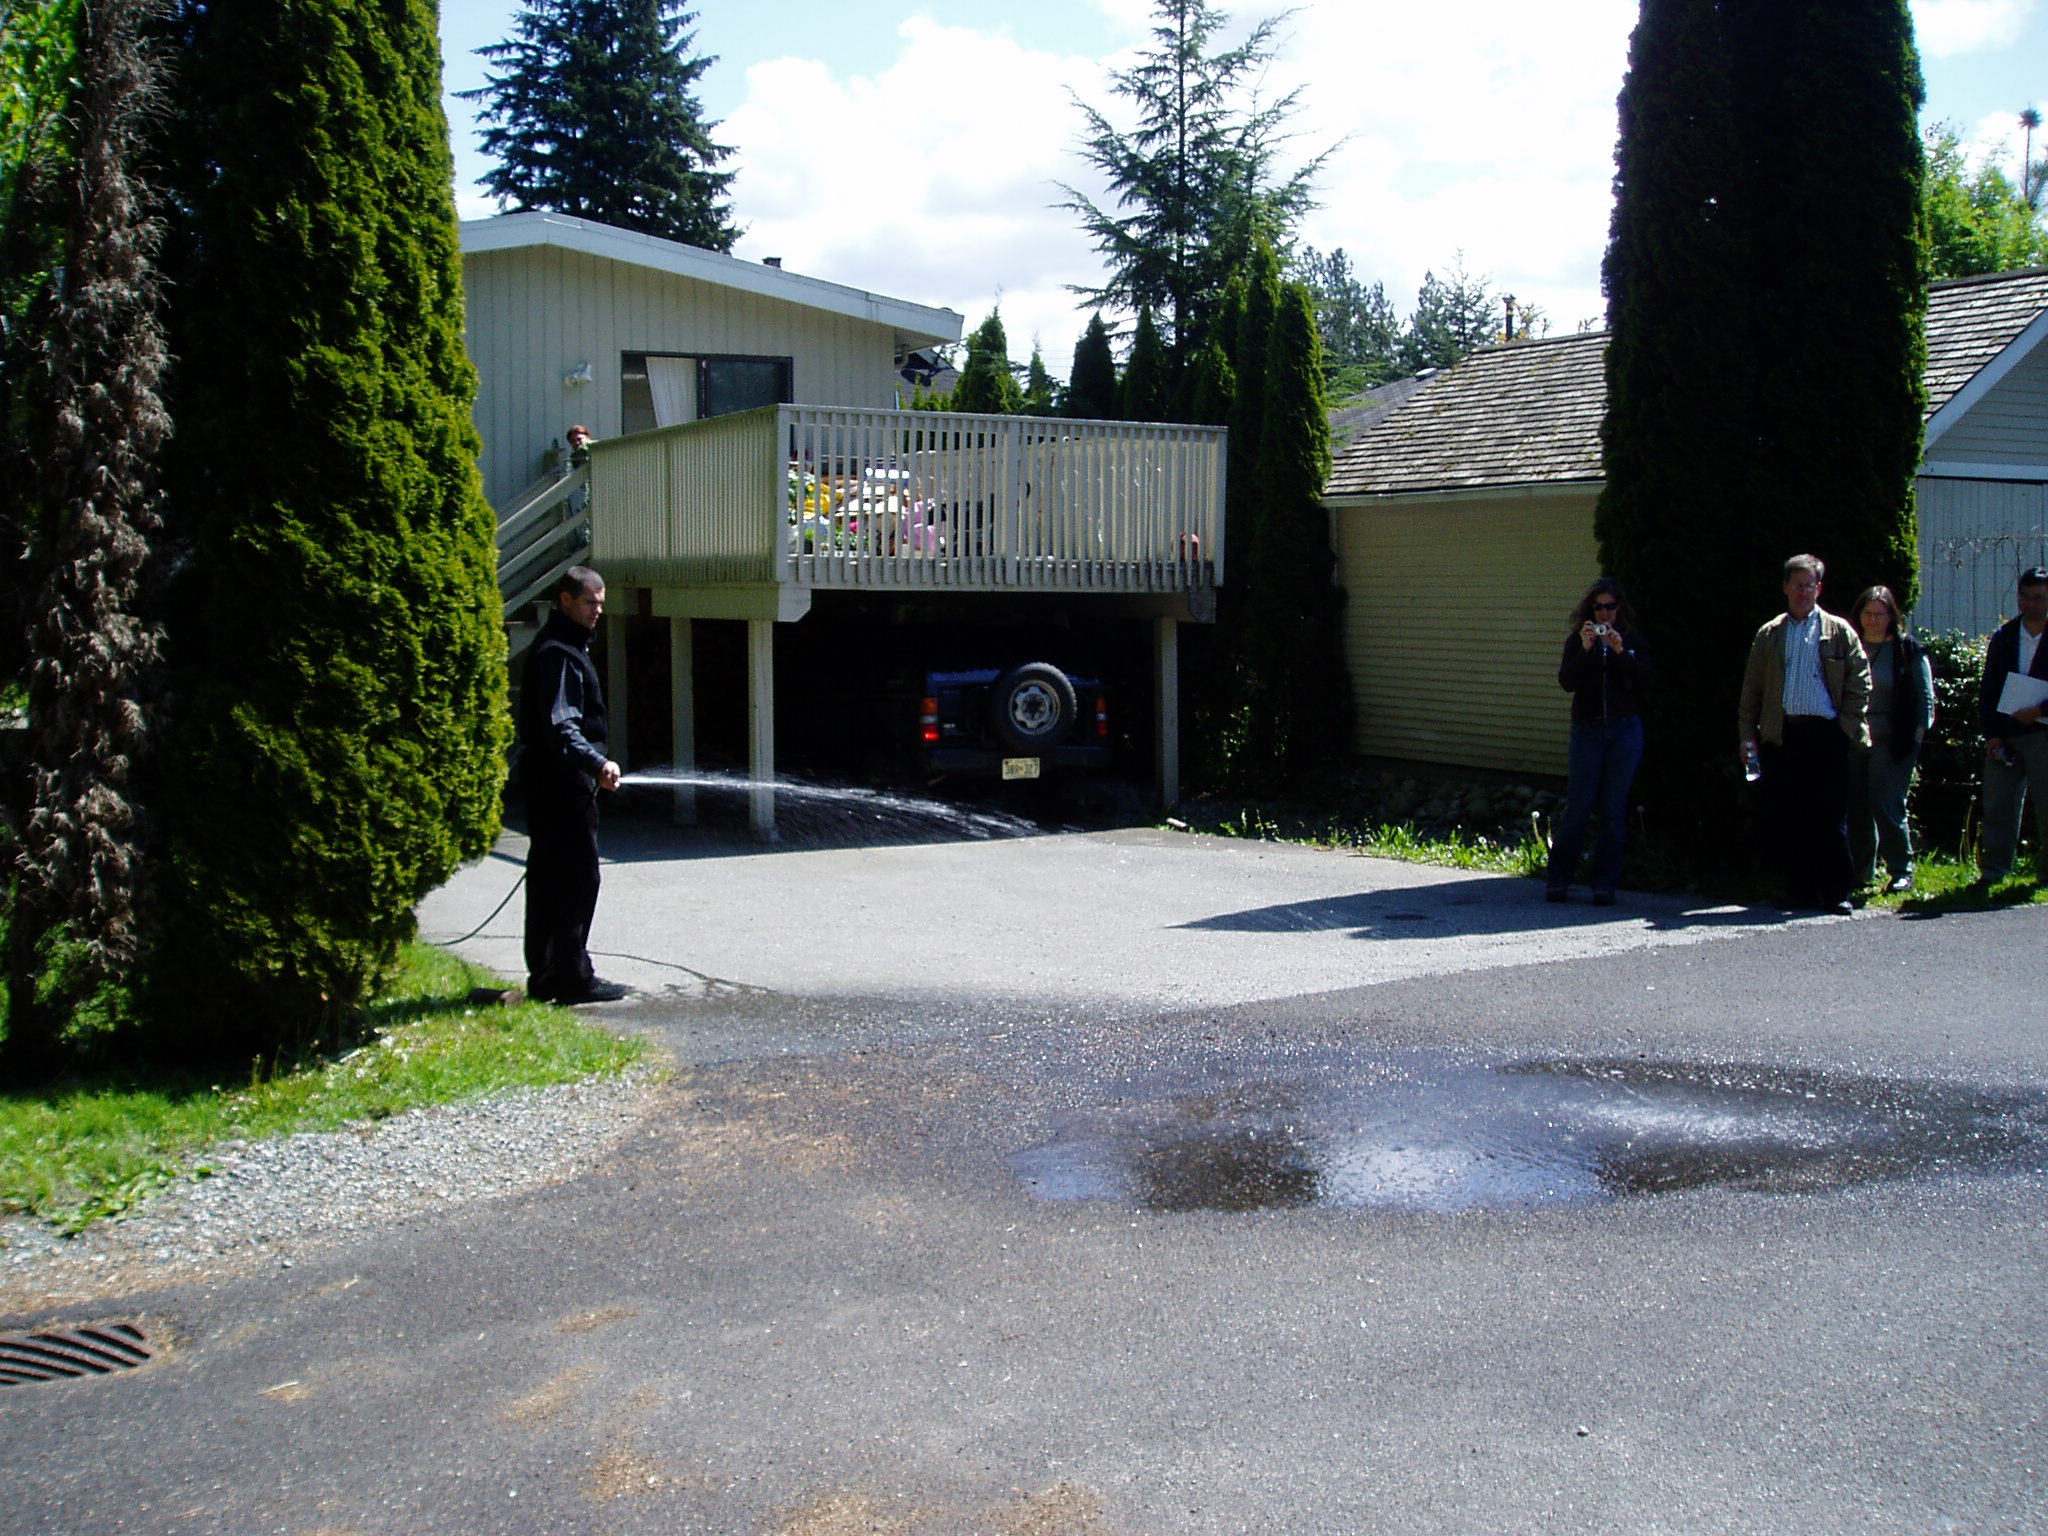 District of North Vancouver showcased a demonstration application of pervious pavement